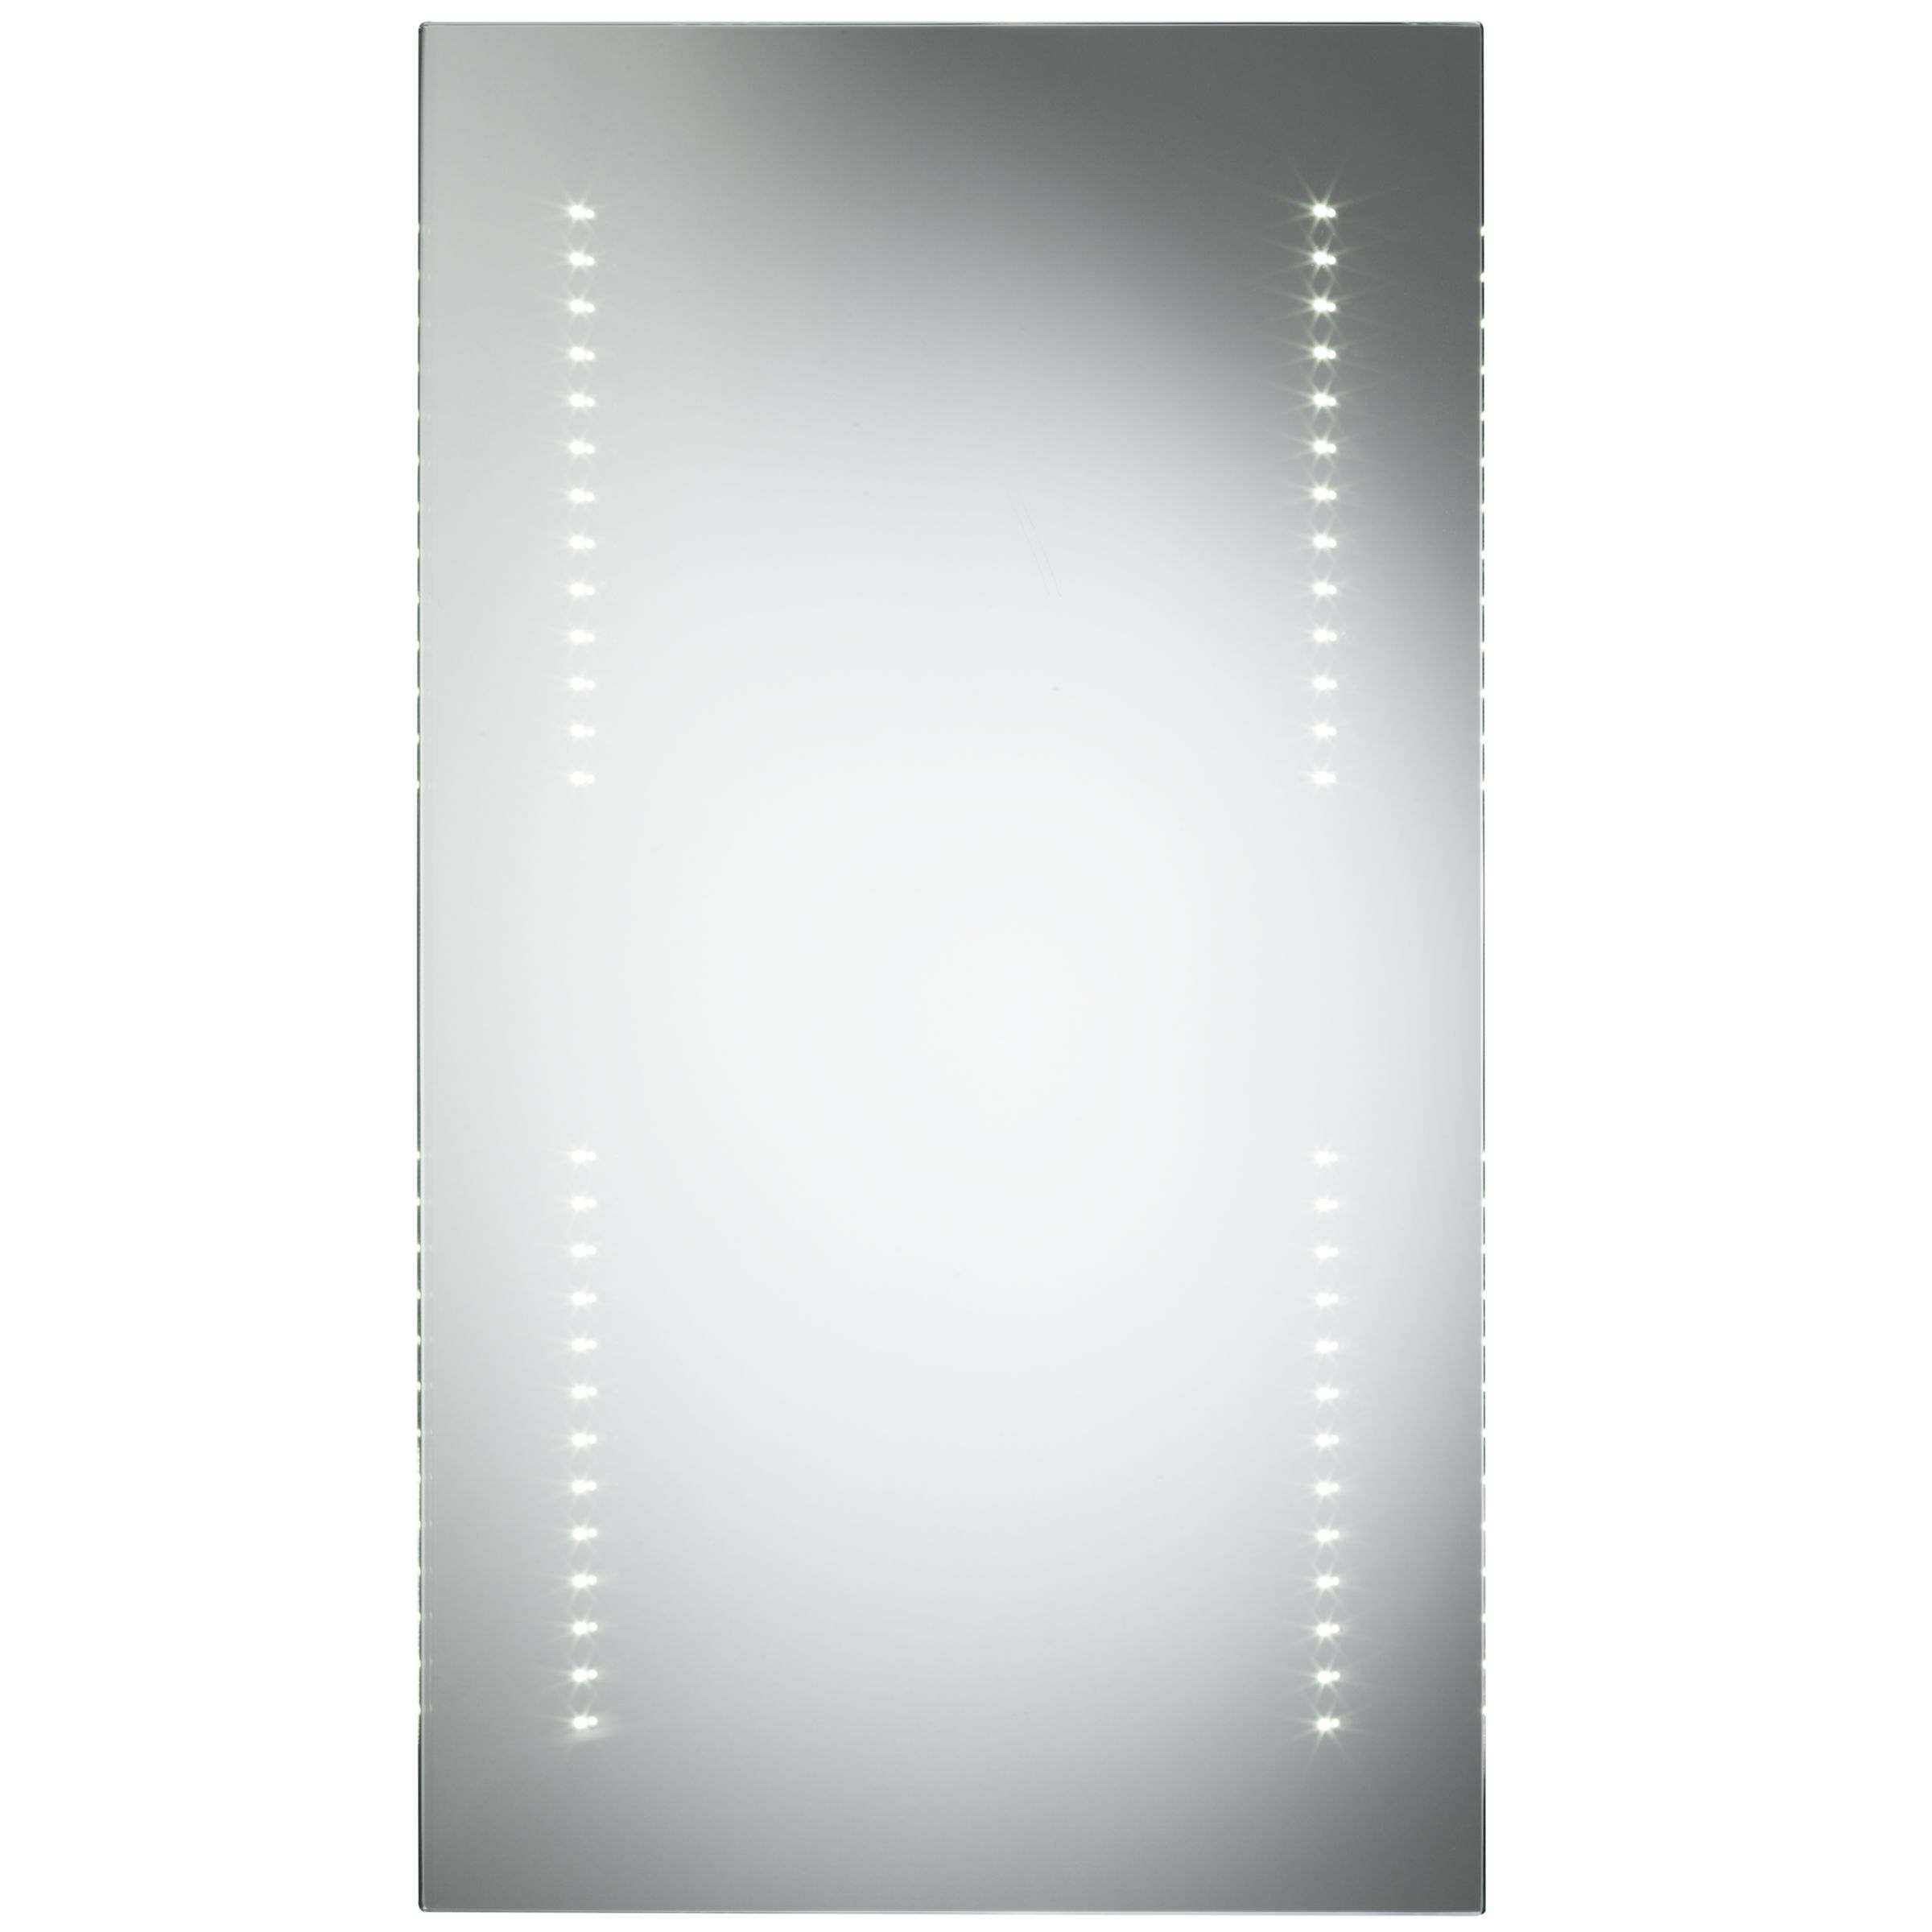 Velocity LED Mirror with Ambi Lights at JohnLewis